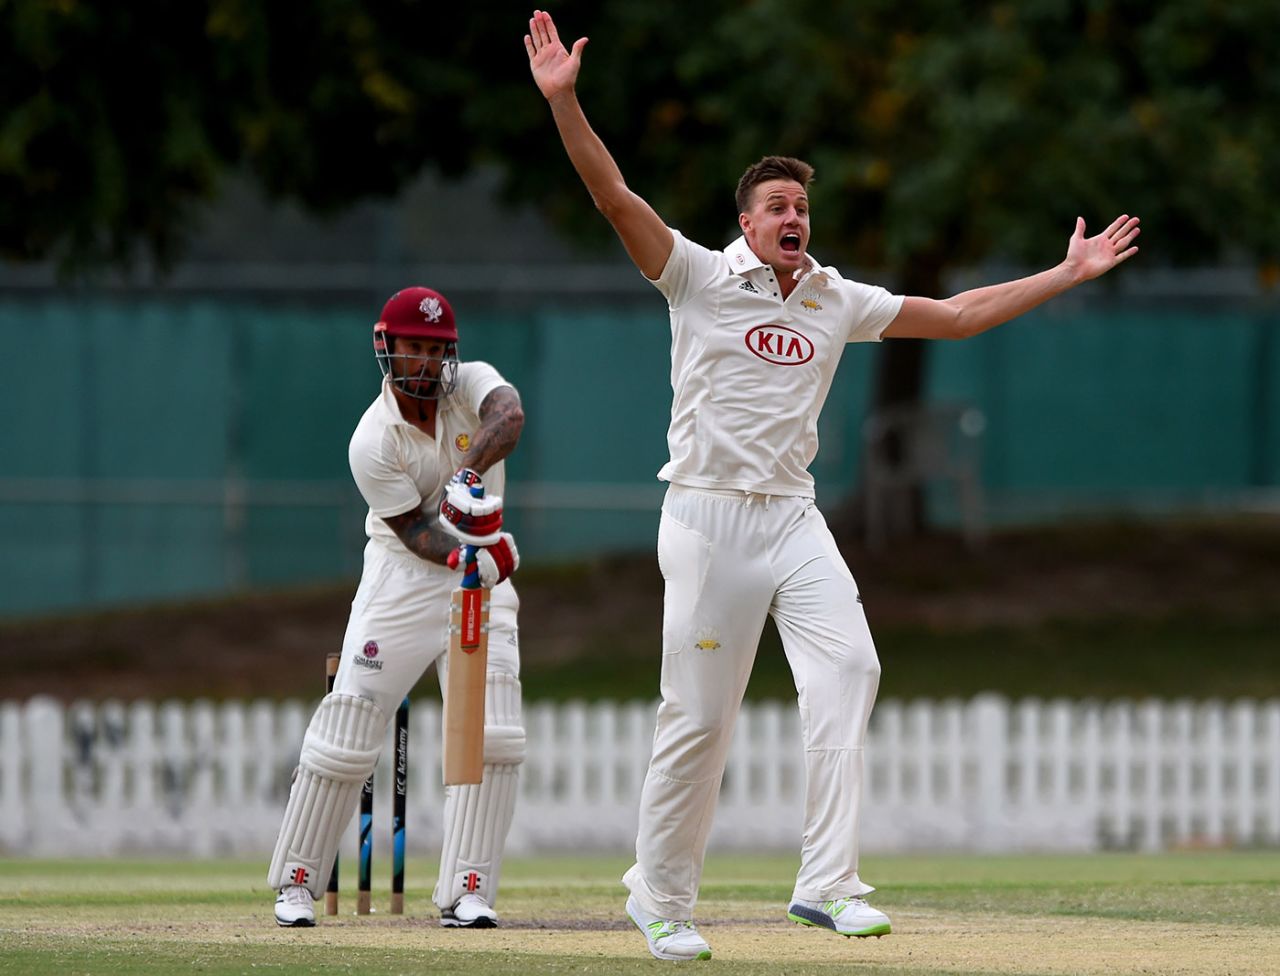 Morne Morkel appeals for a wicket, MCC v Surrey, County Champion match, day four, Dubai, March 27, 2019